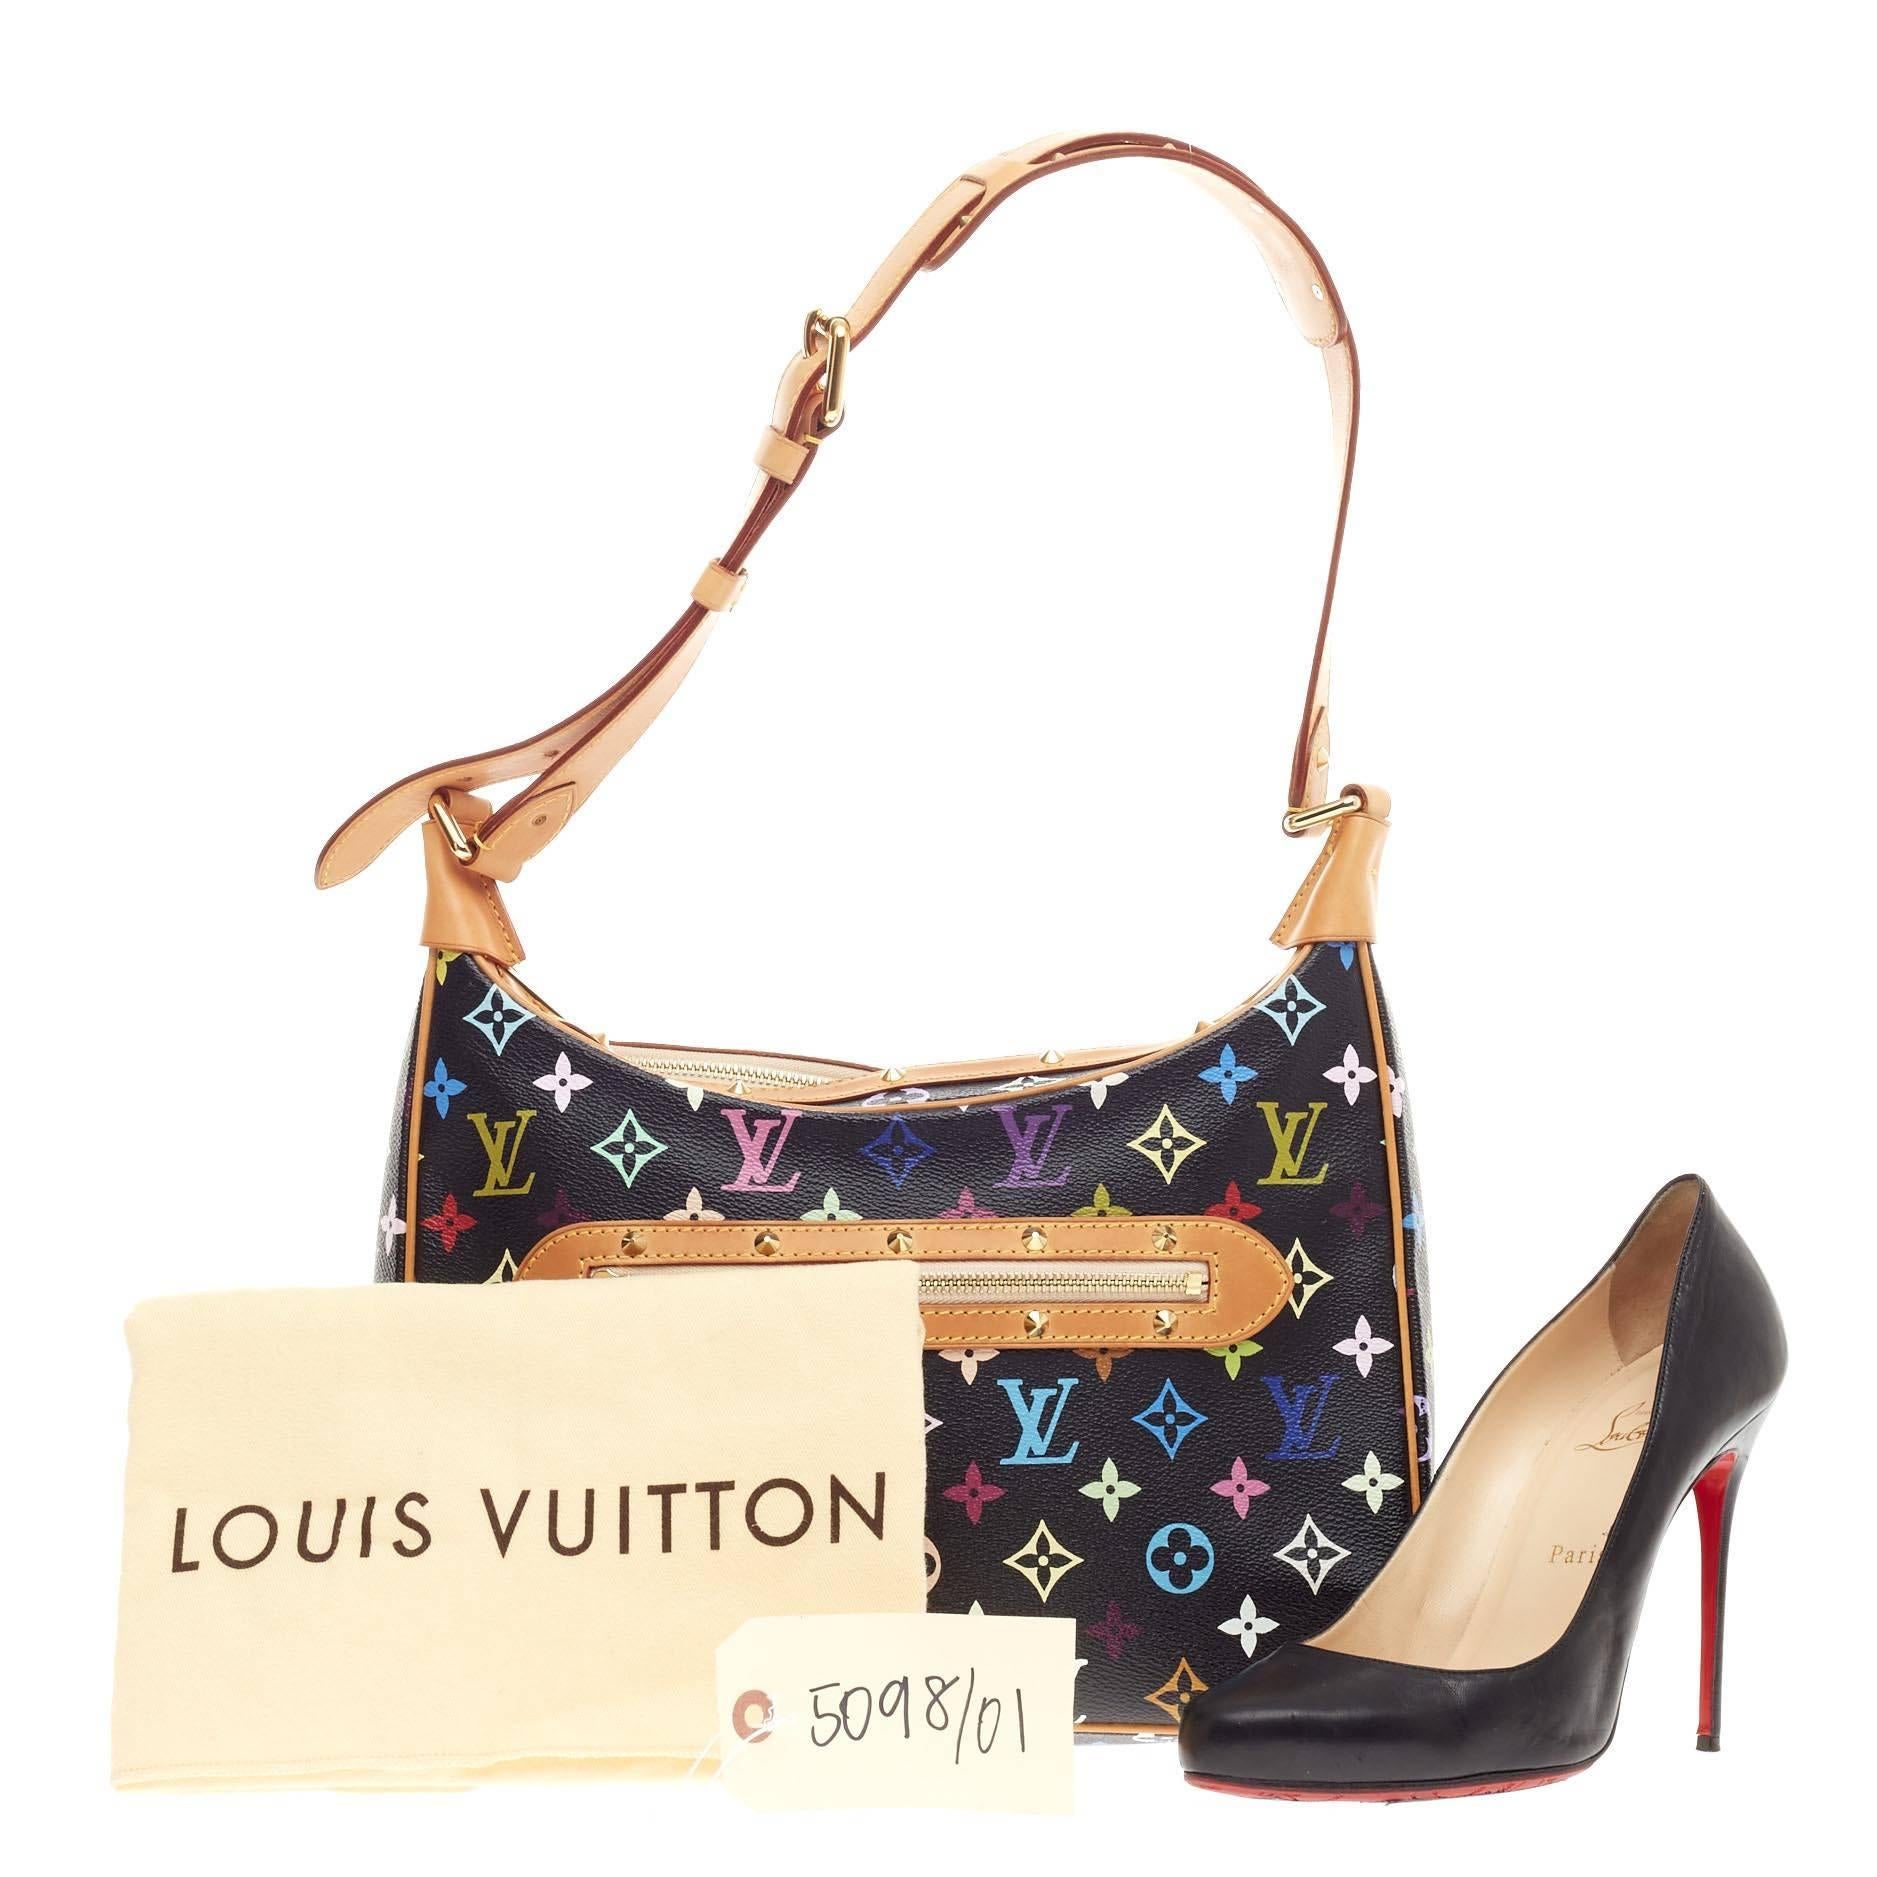 This authentic Louis Vuitton Boulogne Monogram Multicolor showcases a stylish and stunning design perfect for everyday use. Crafted from black monogram multicolor printed canvas, this elegant shoulder bag features an adjustable shoulder strap,